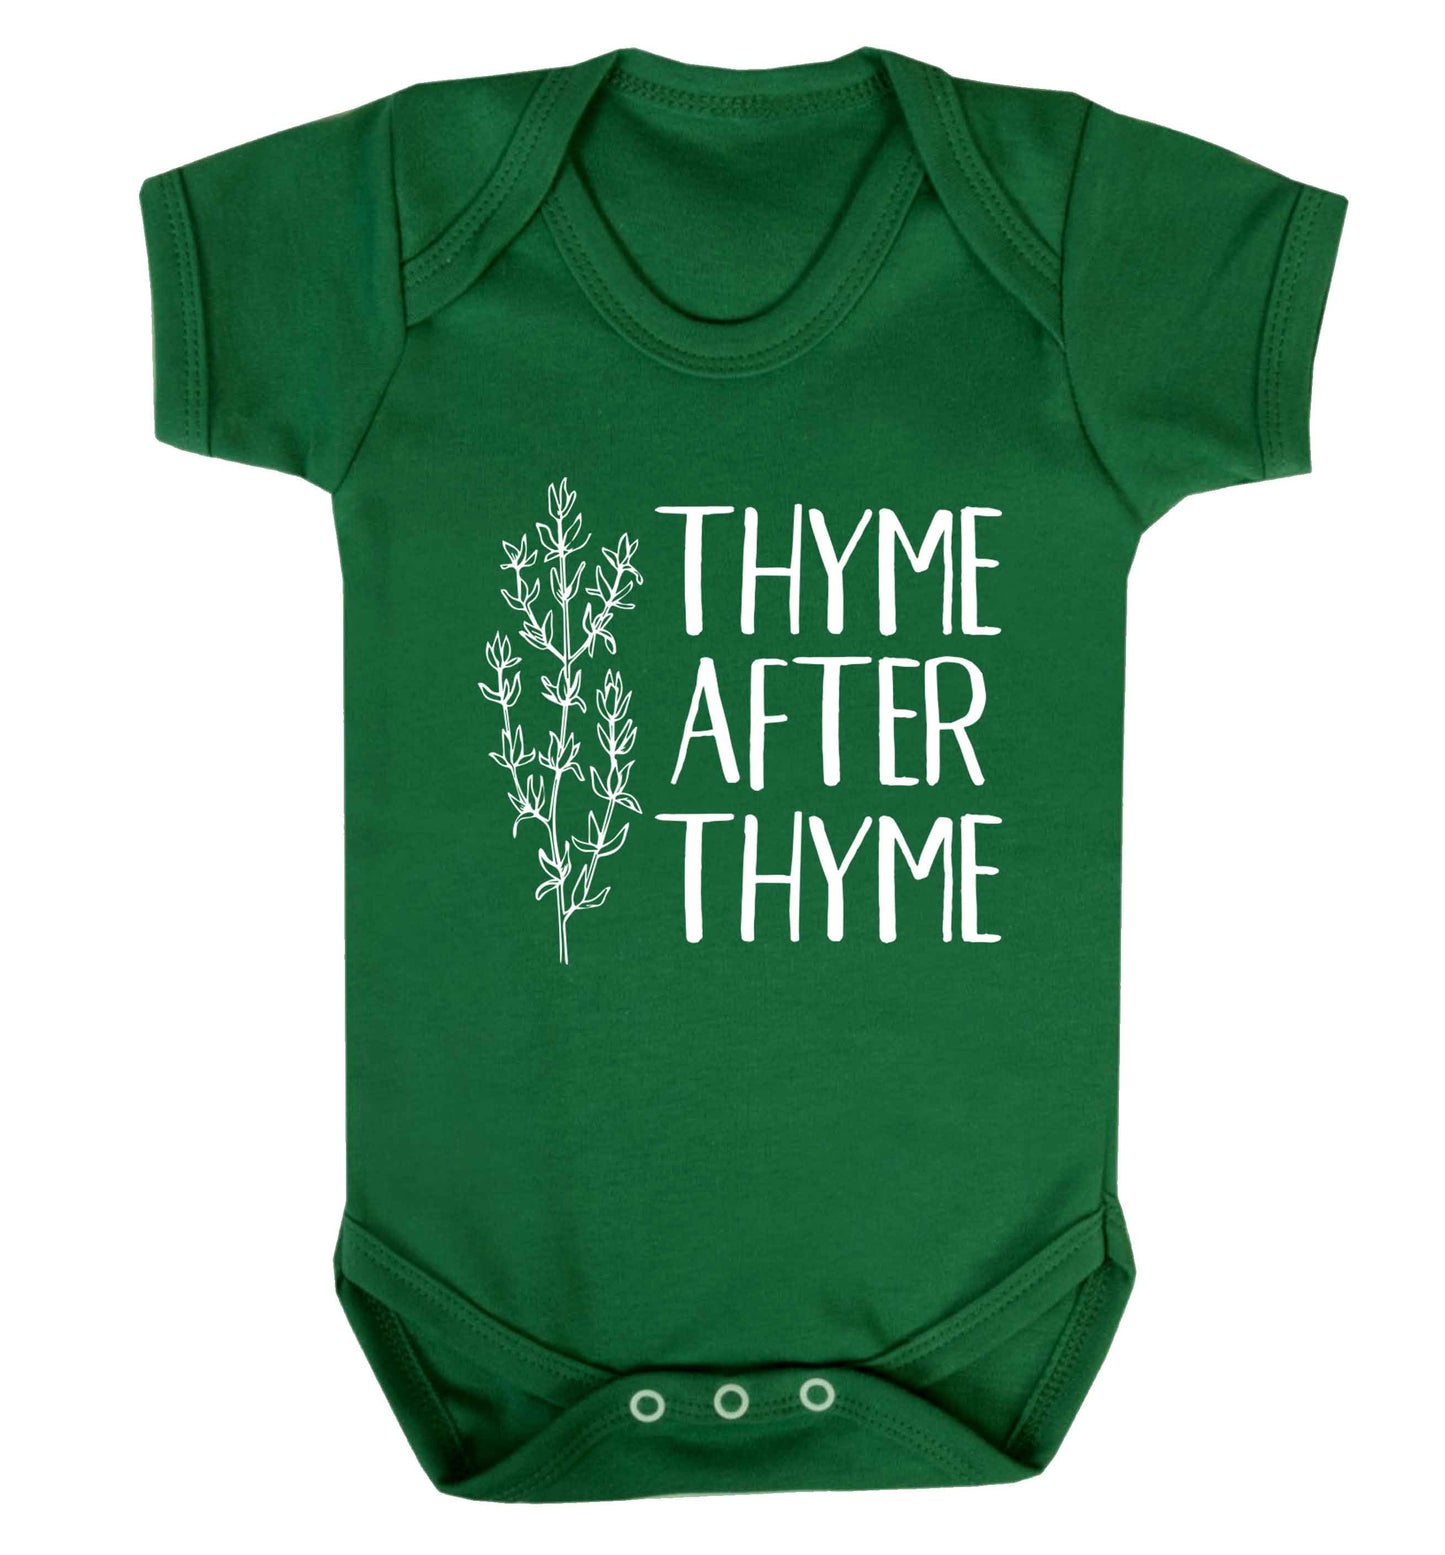 Thyme after thyme Baby Vest green 18-24 months